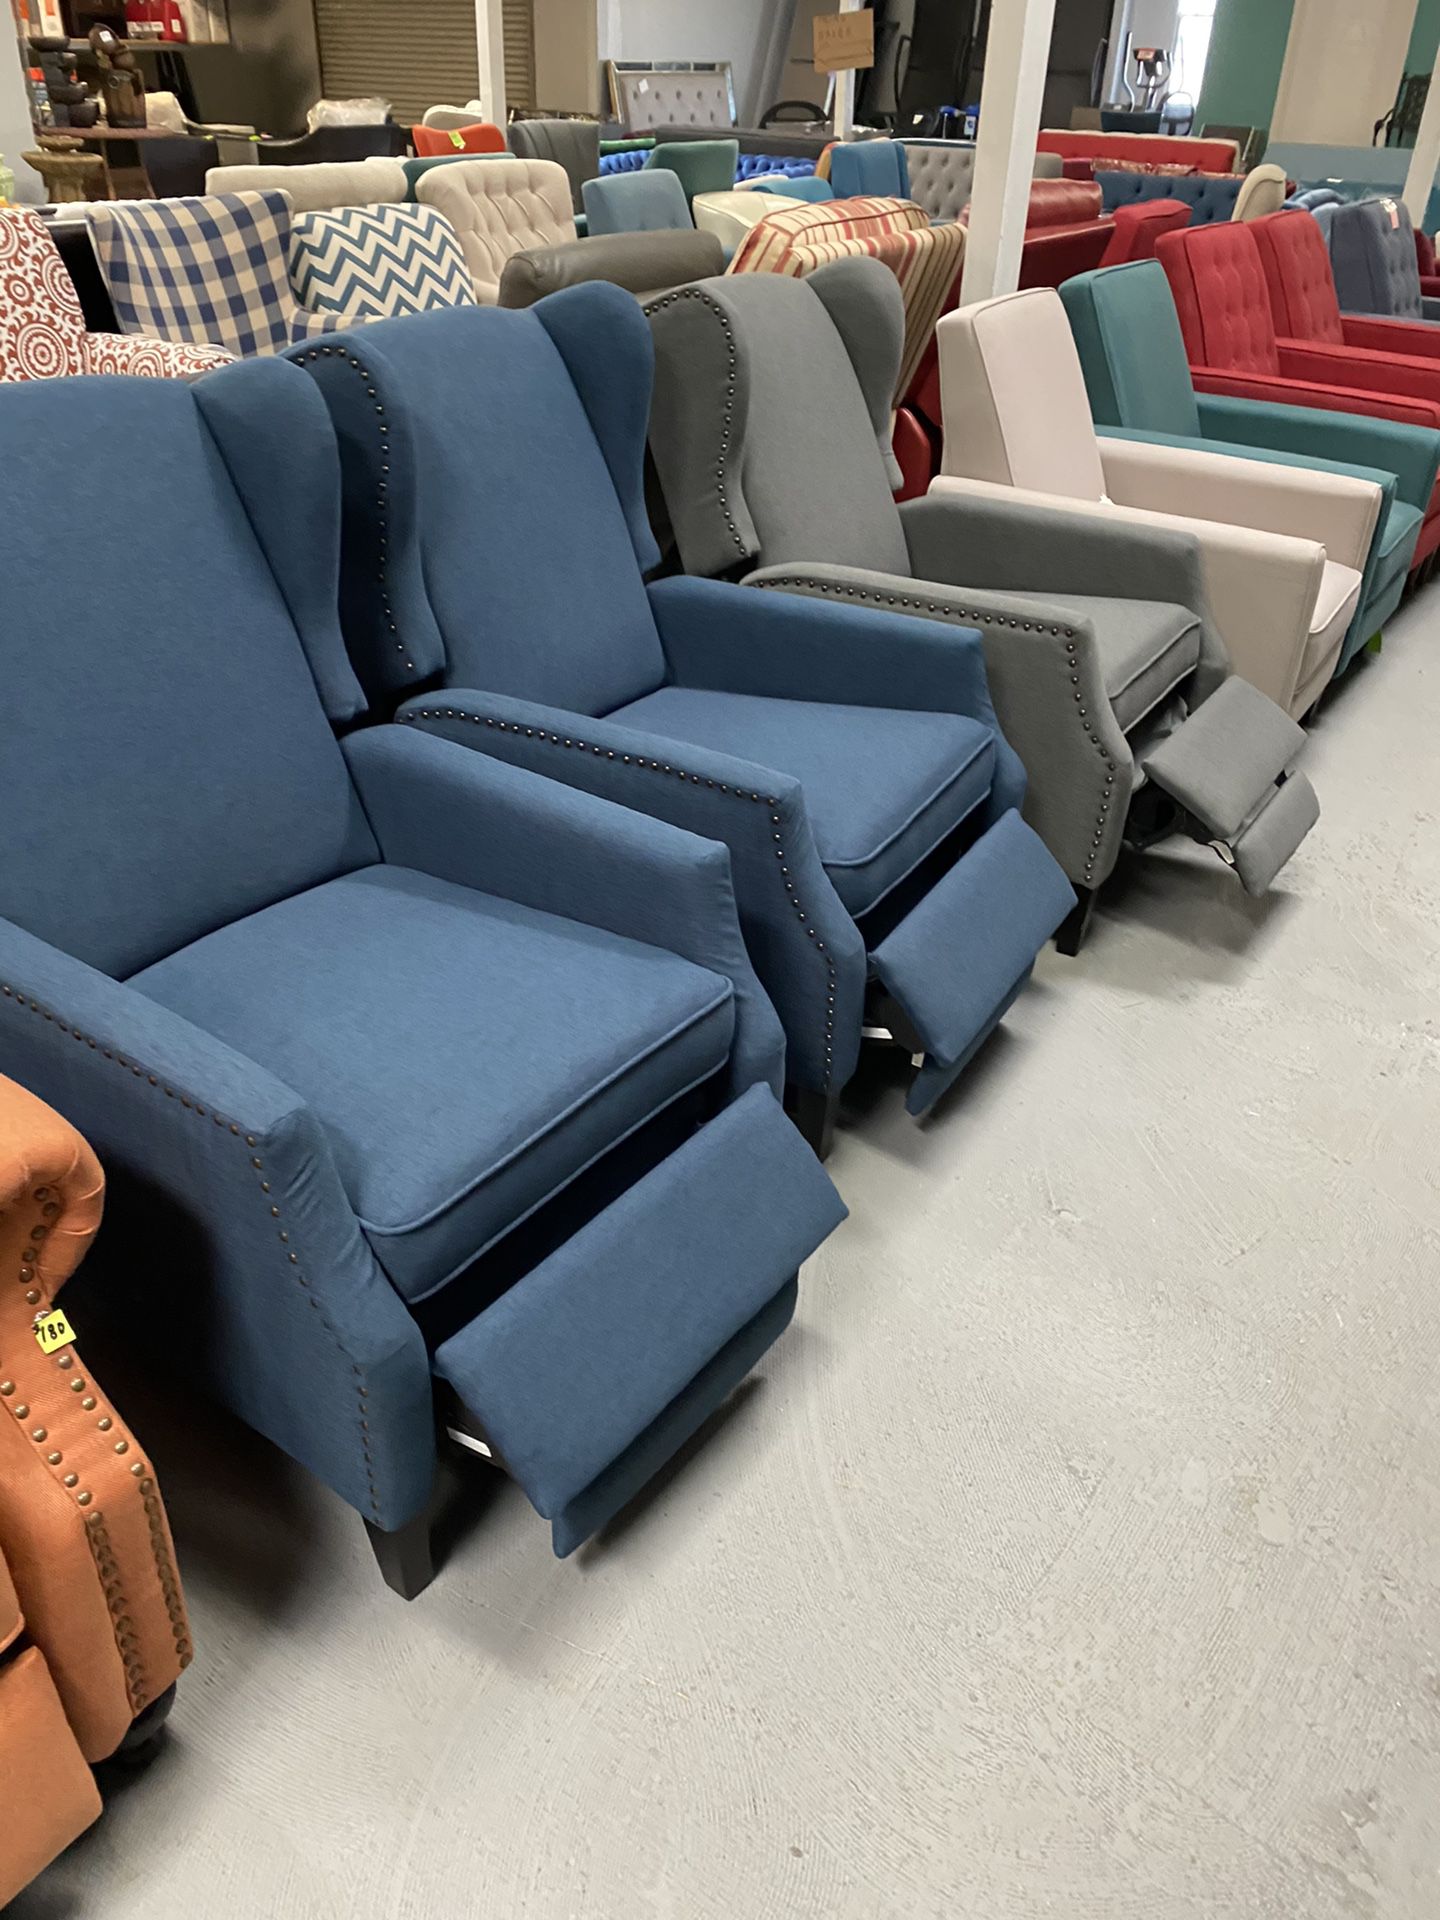 Recliner sofa chairs